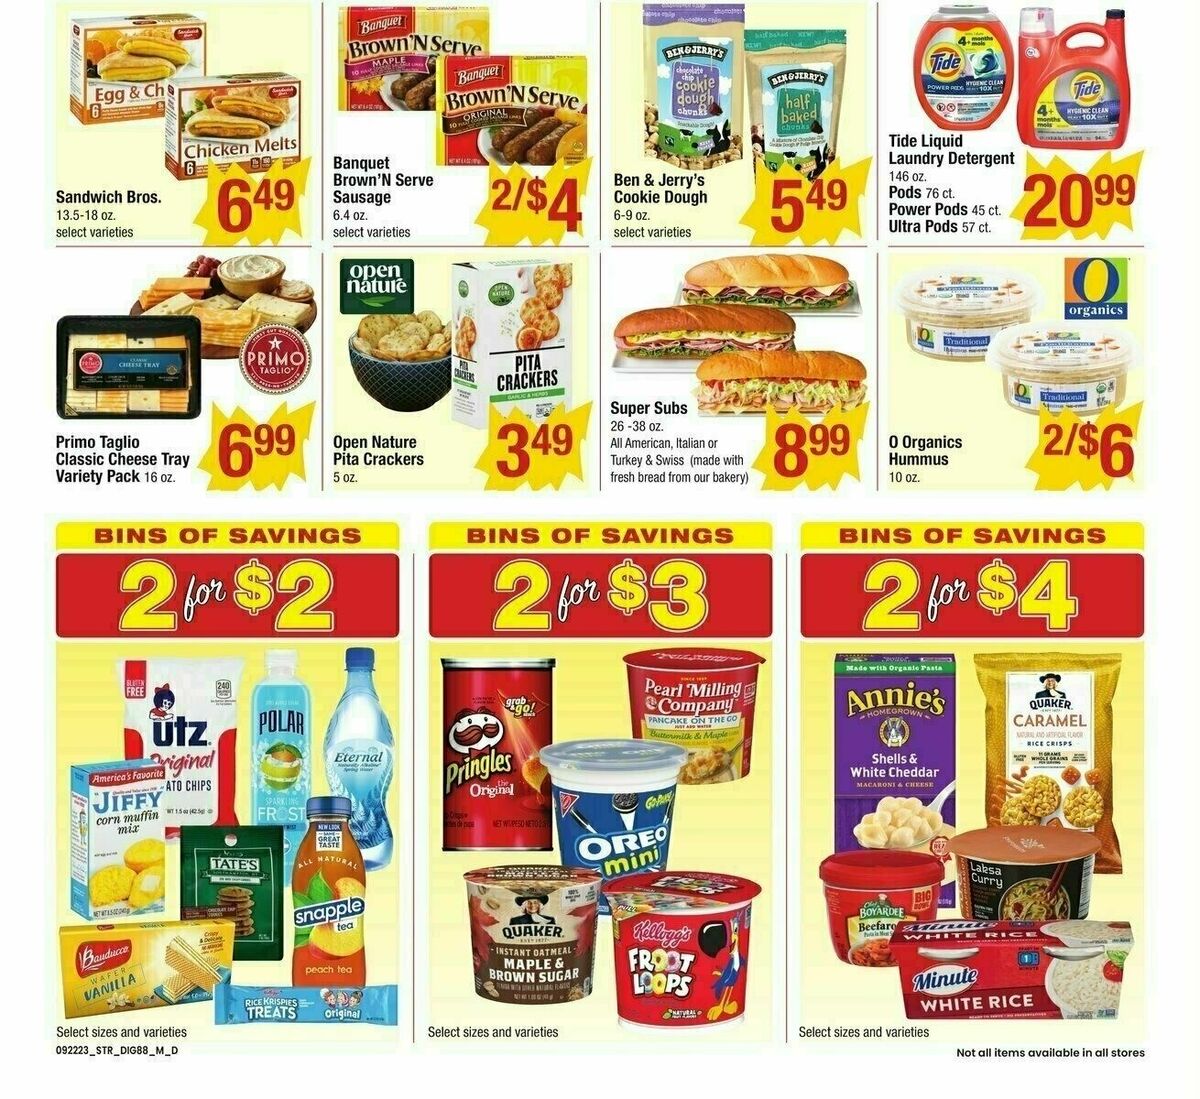 Star Market Additional Savings Weekly Ad from September 22